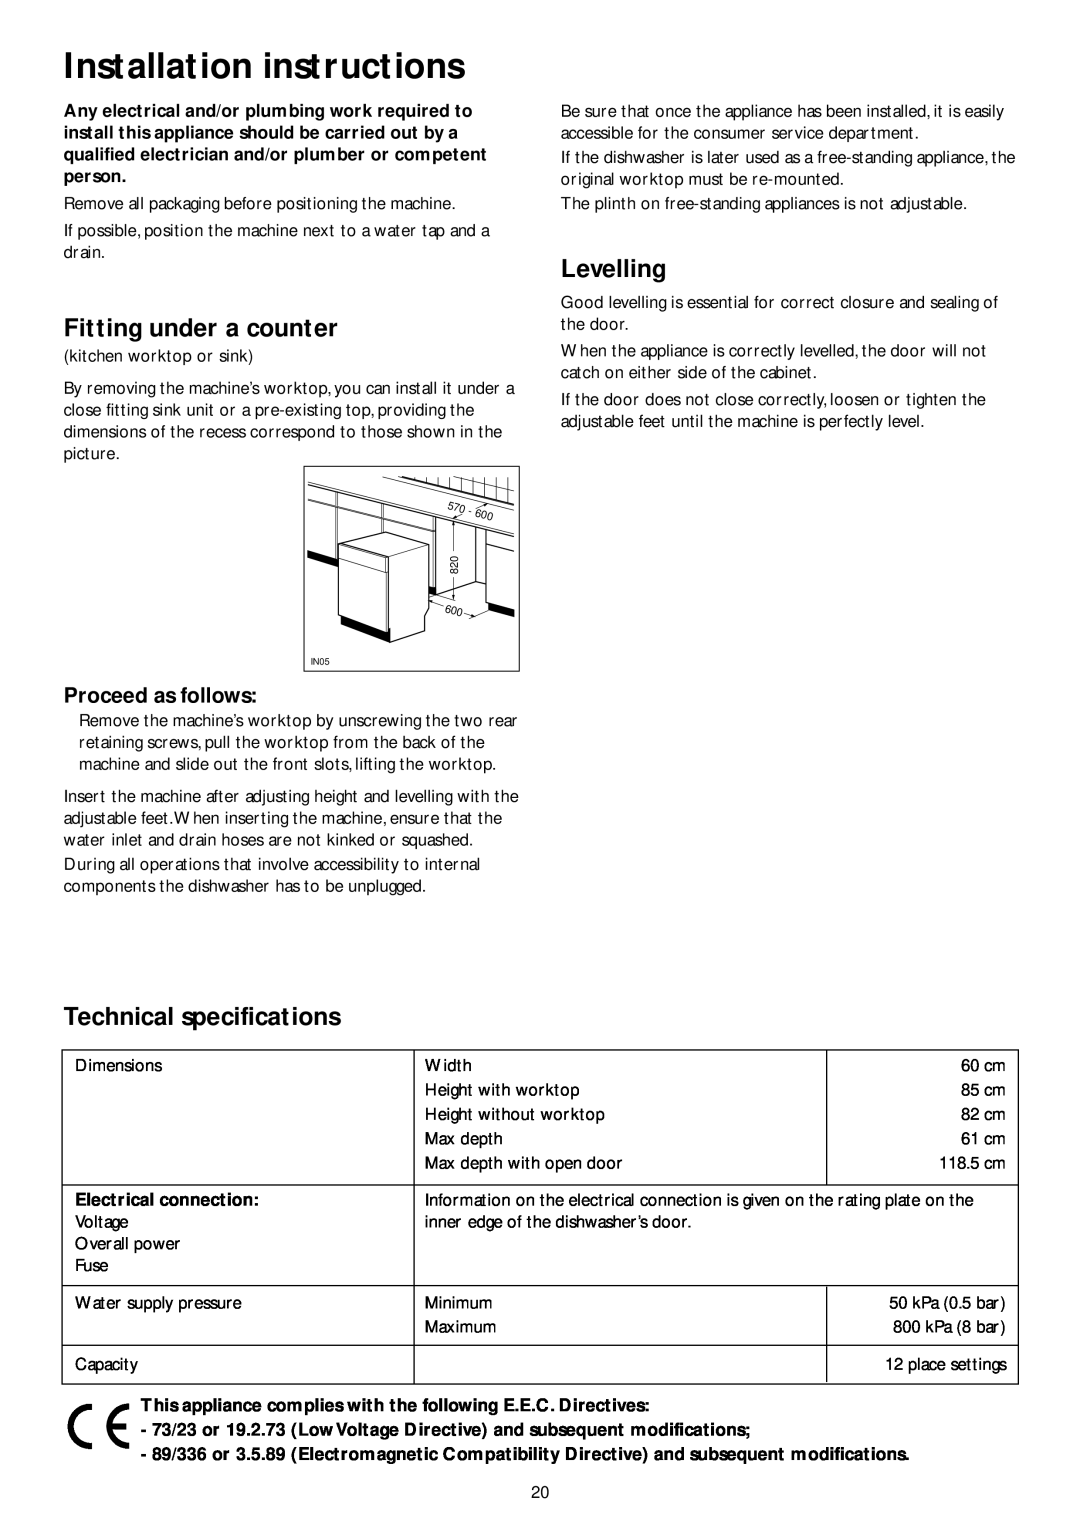 John Lewis JLDWW 1201 Installation instructions, Fitting under a counter, Levelling, Technical specifications 